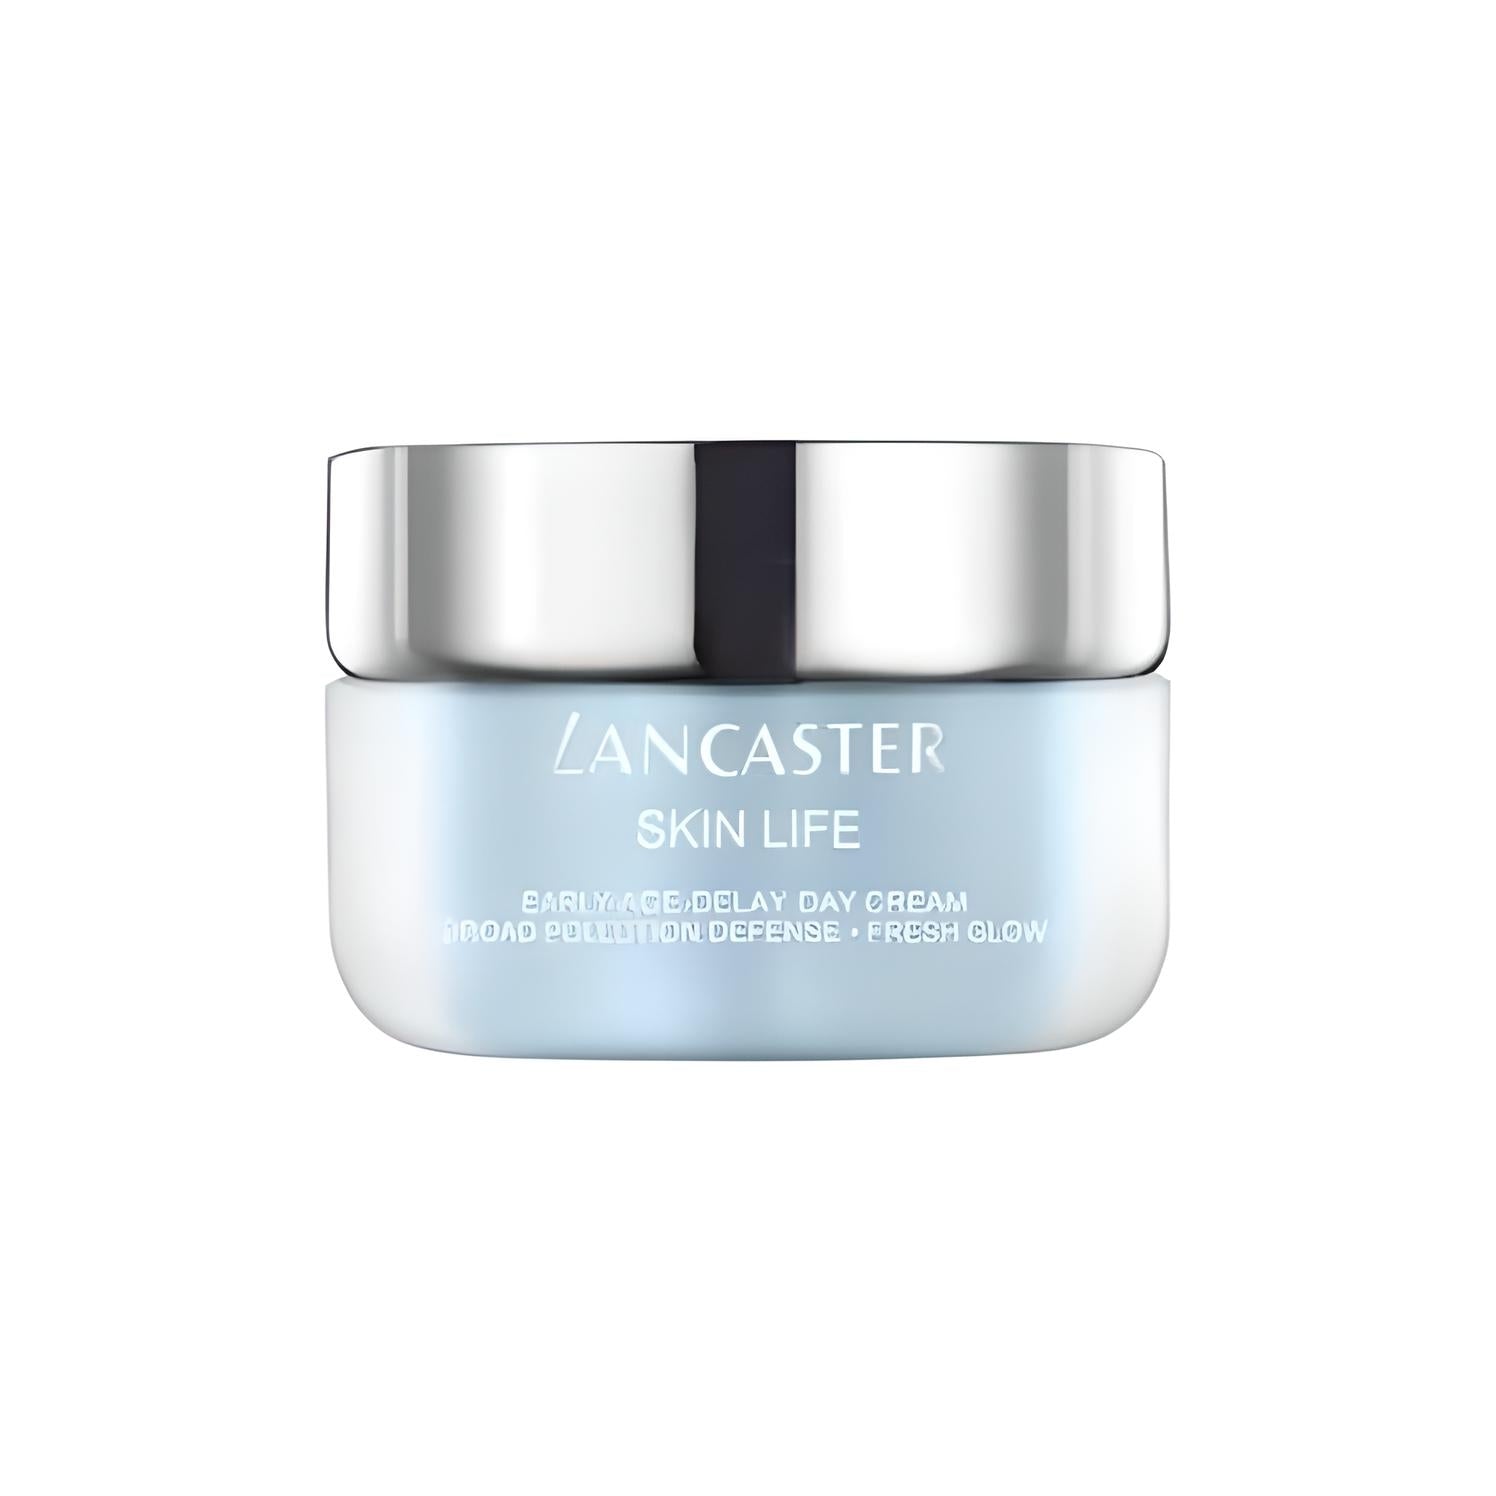 SKIN LIFE early age-delay day cream Gesichtspflege LANCASTER   